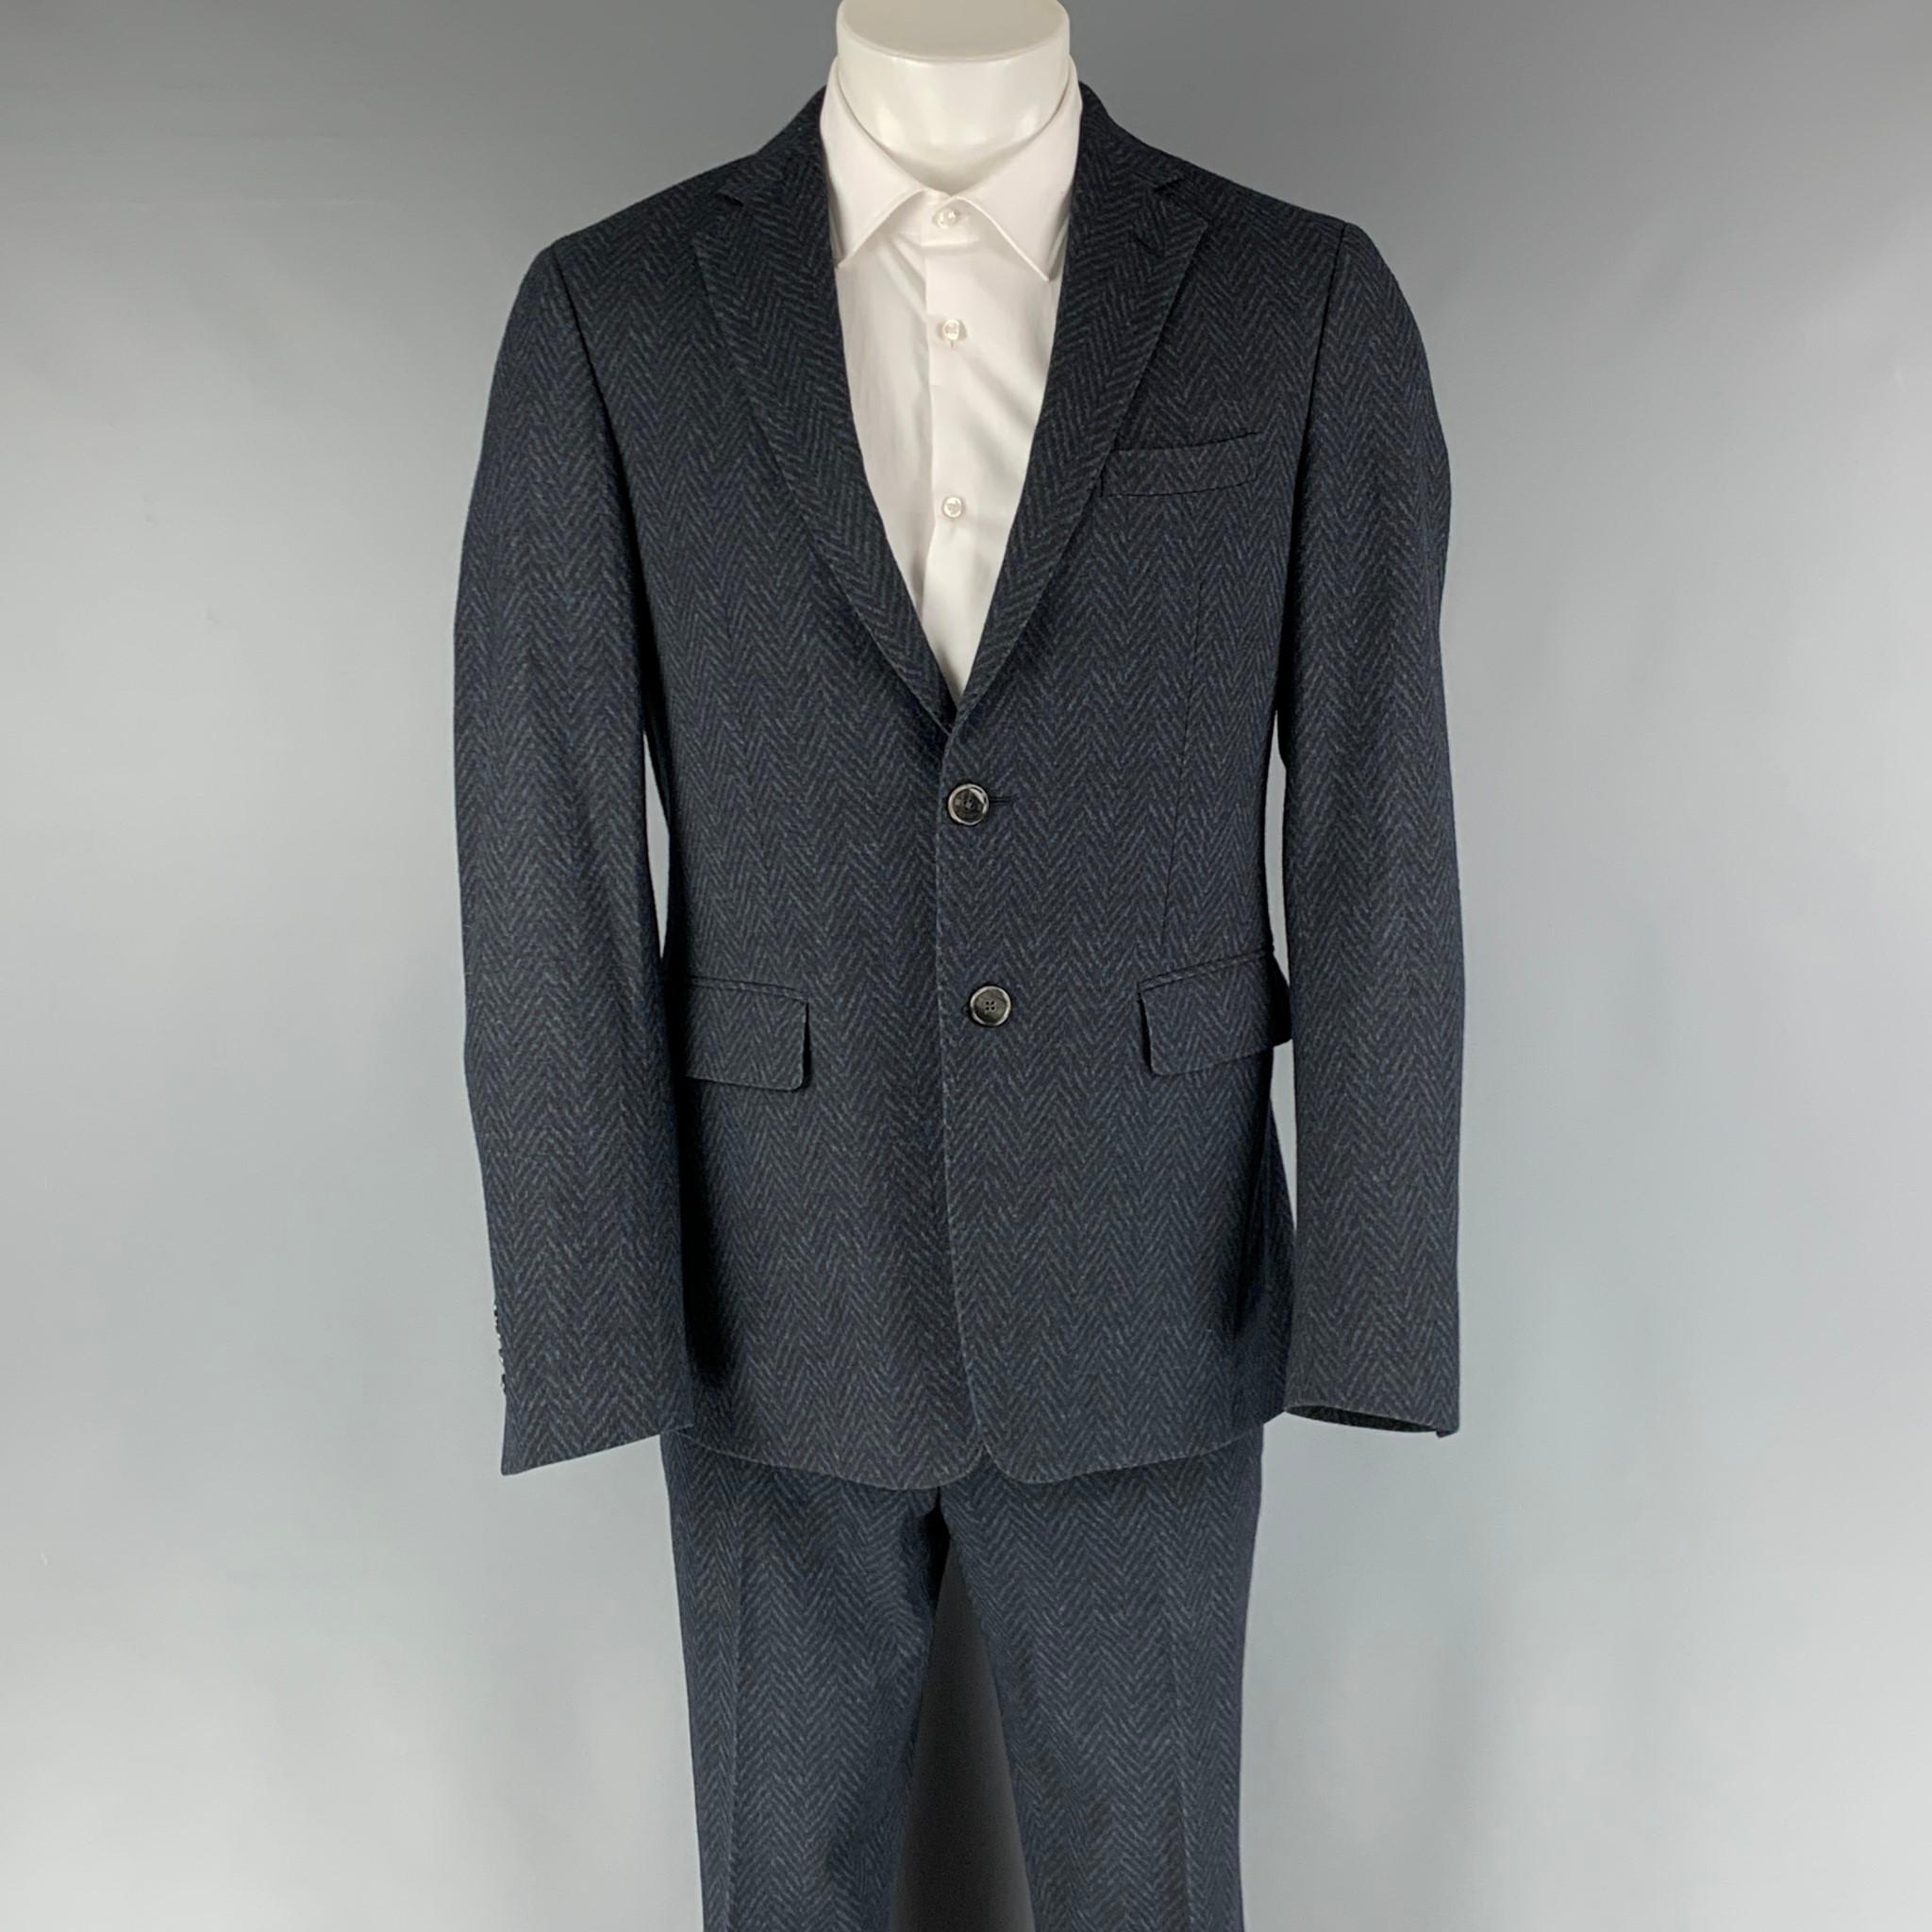 ETRO suit comes in a navy and black wool blend herringbone woven material with a full liner and includes a single breasted, two button sport coat with notch lapel and matching flat front trousers. Made in Italy.

Excellent Pre-Owned